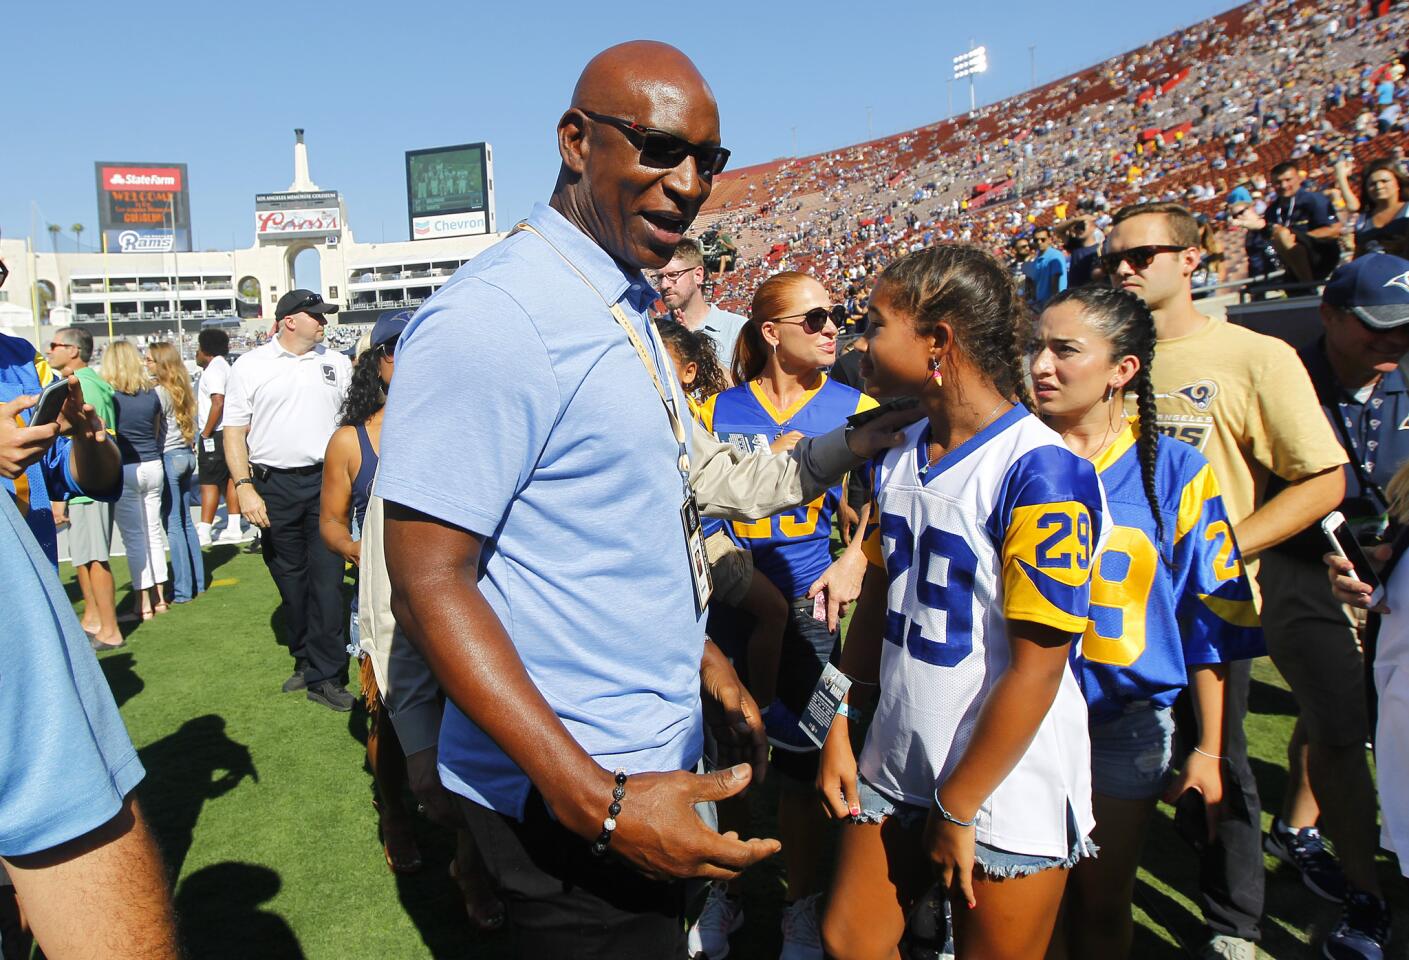 Rams Hall of Fame running back Eric Dickerson attends the preseasongame against the Dallas Cowboys at the Coliseum.